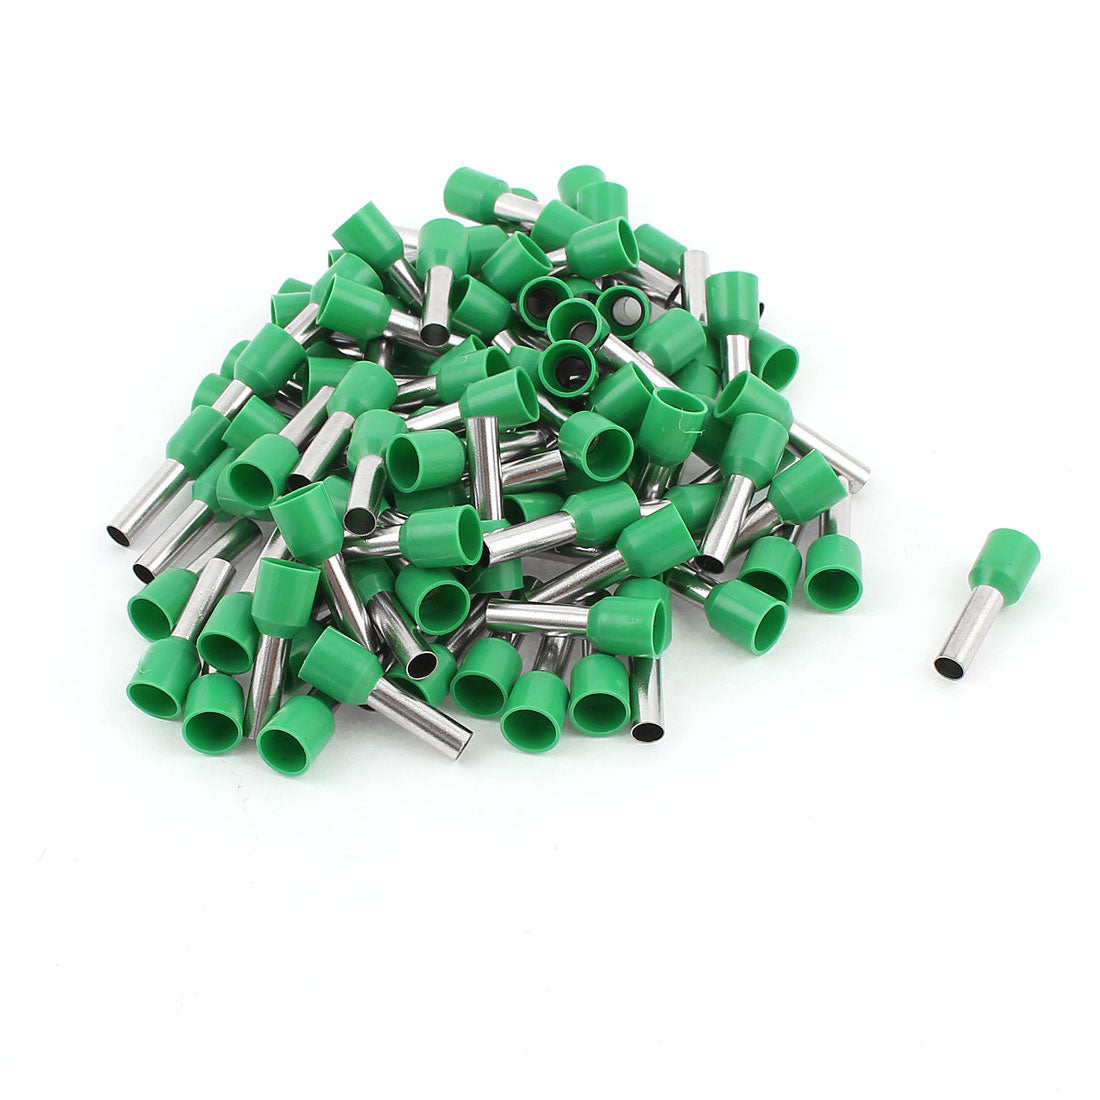 uxcell Uxcell 100 Pcs 6mm2 Crimp Cord Wire End Terminal Insulated Bootlace Ferrule Connector Green